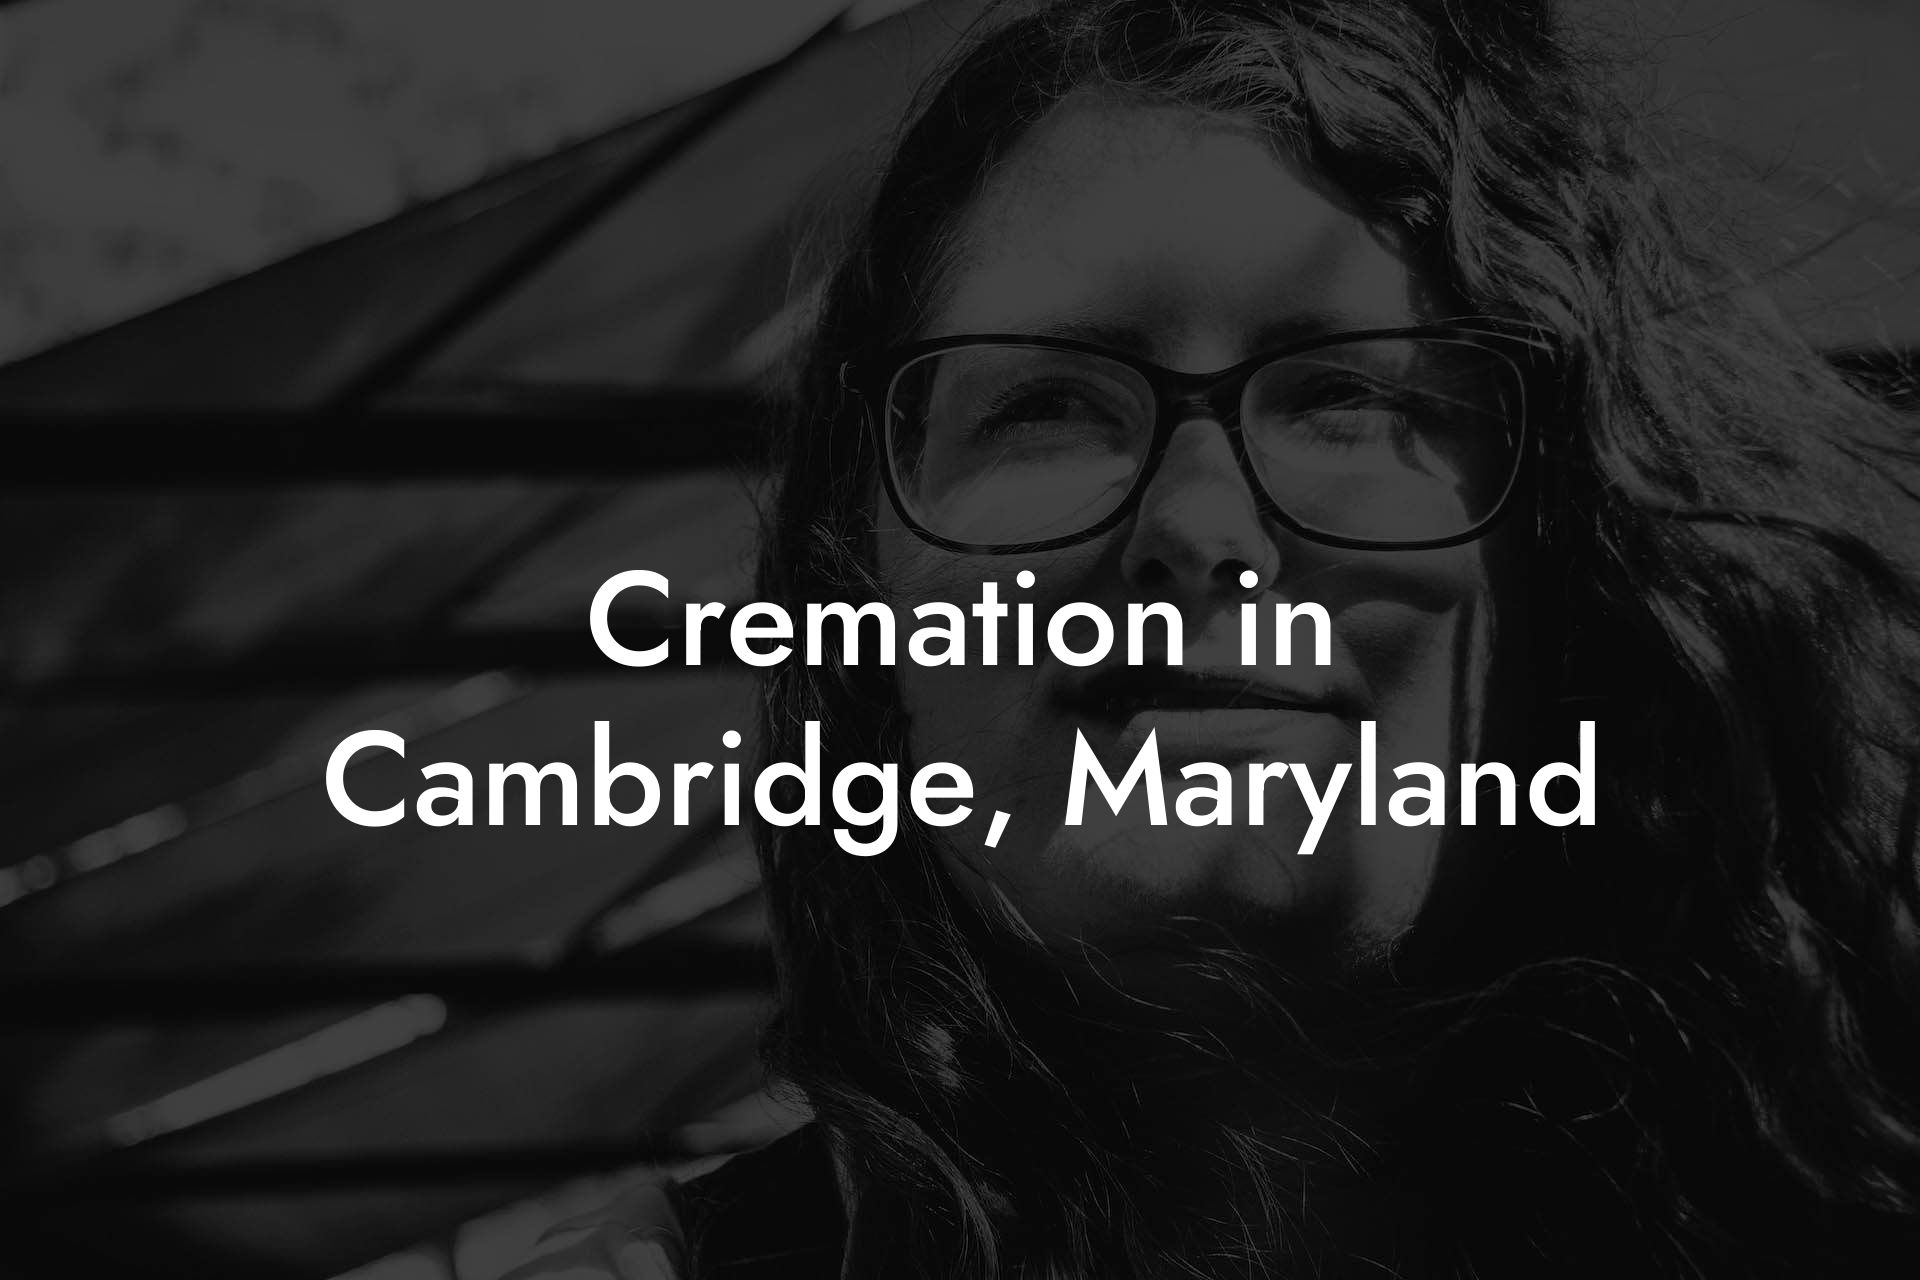 Cremation in Cambridge, Maryland